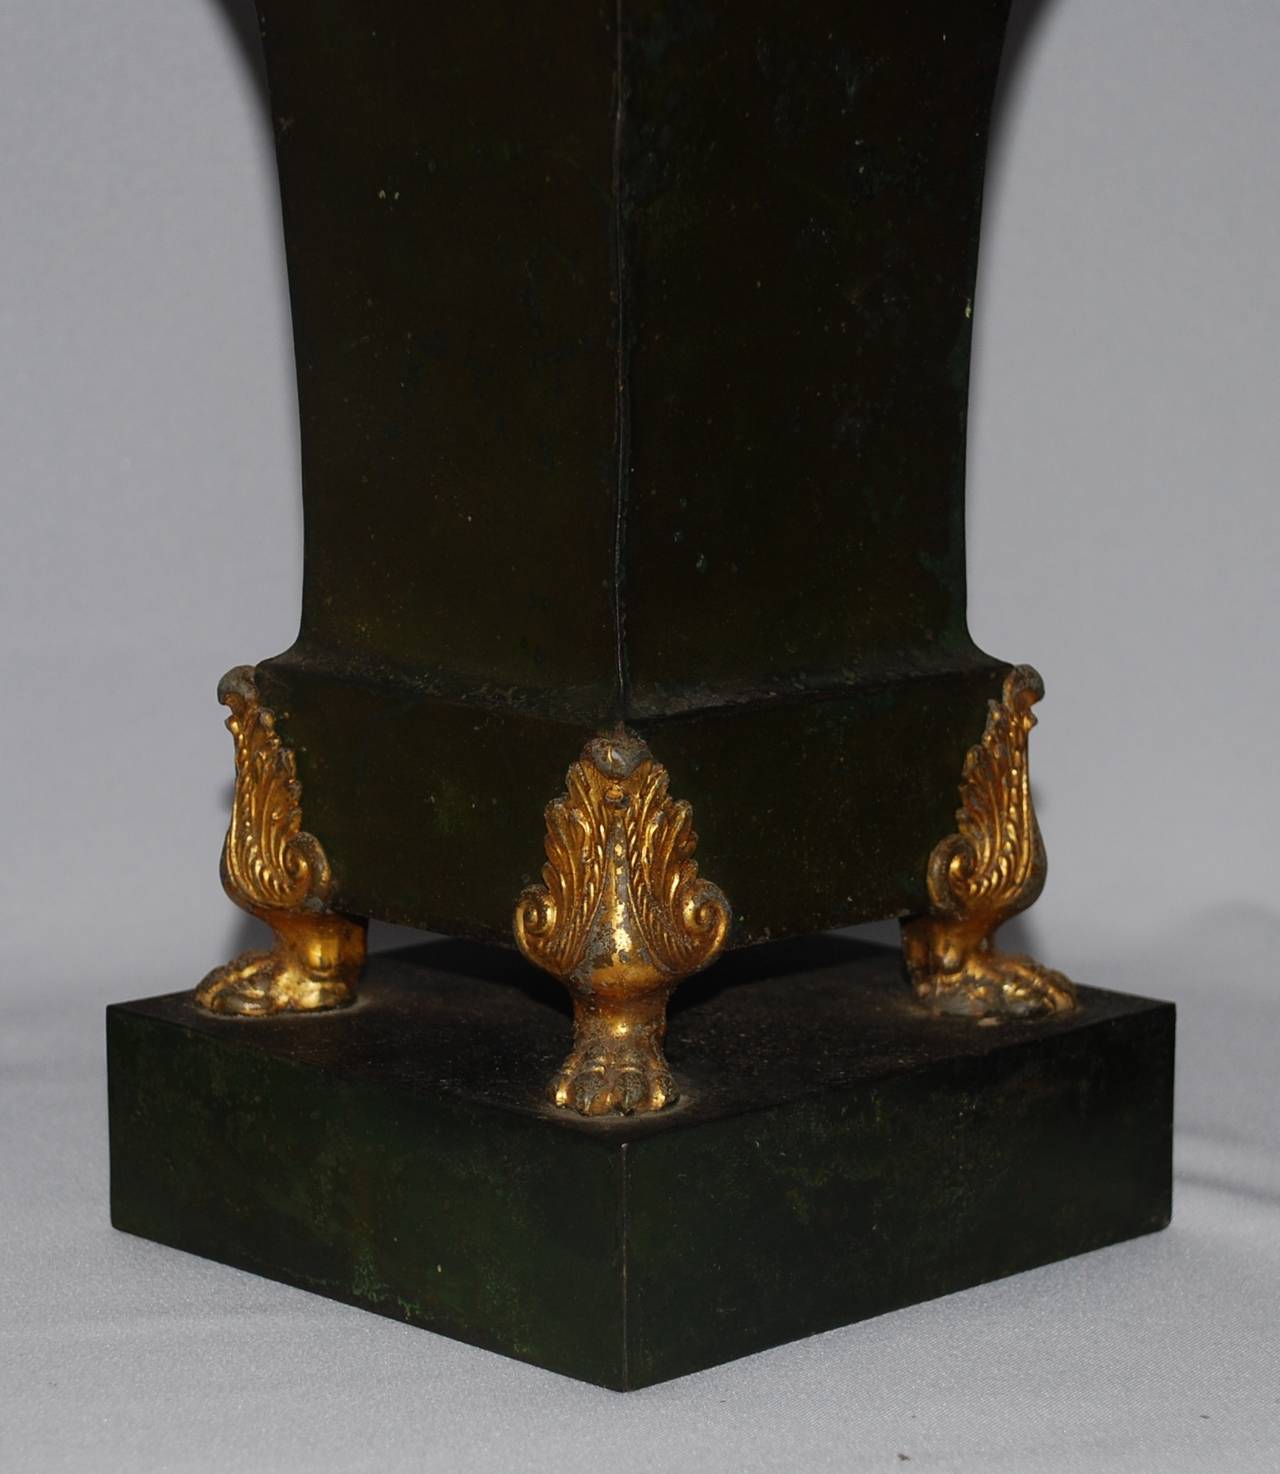 Pair French Empire dark green tole jardinieres with gilt metal paw feet on raised platform with original liners. 
Dimension: 7.75